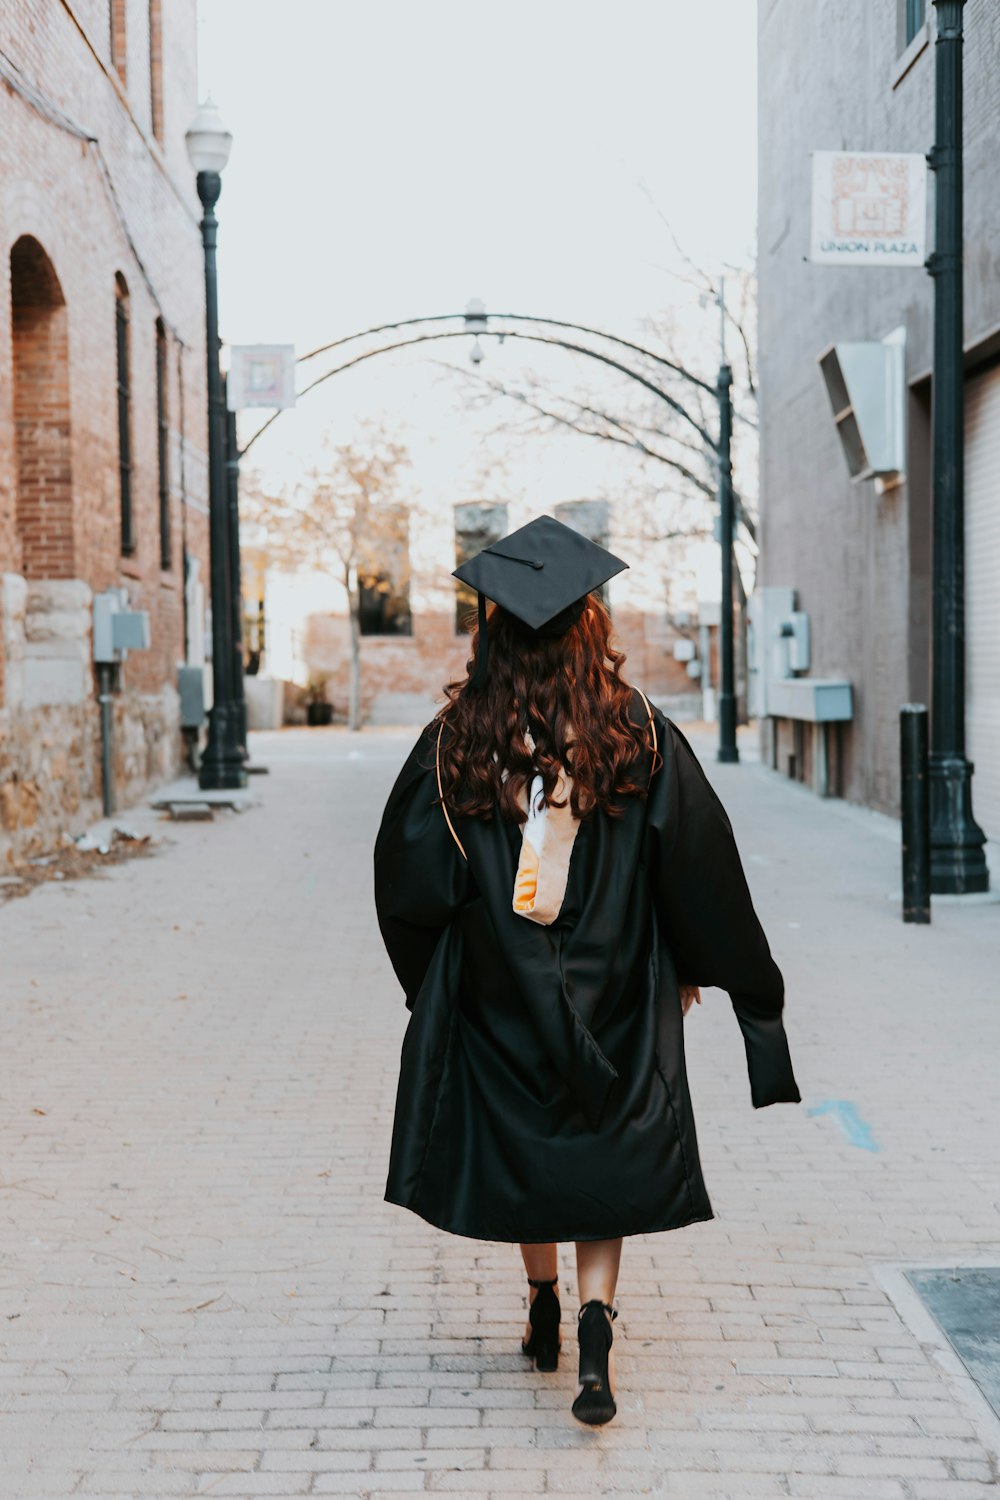 a woman in a graduation gown walks down the street